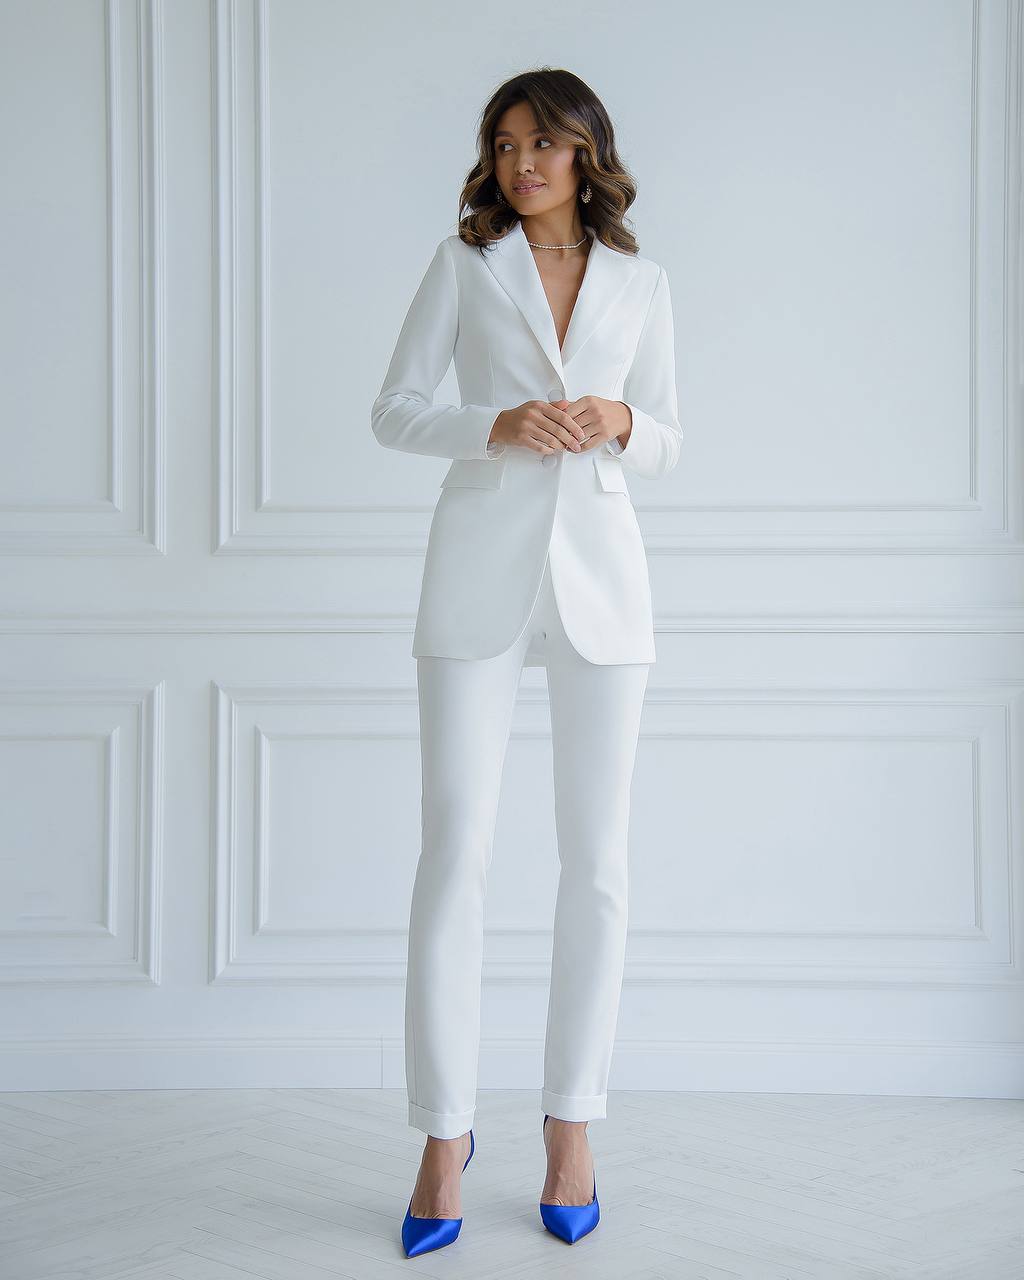 a woman wearing a white suit and blue shoes